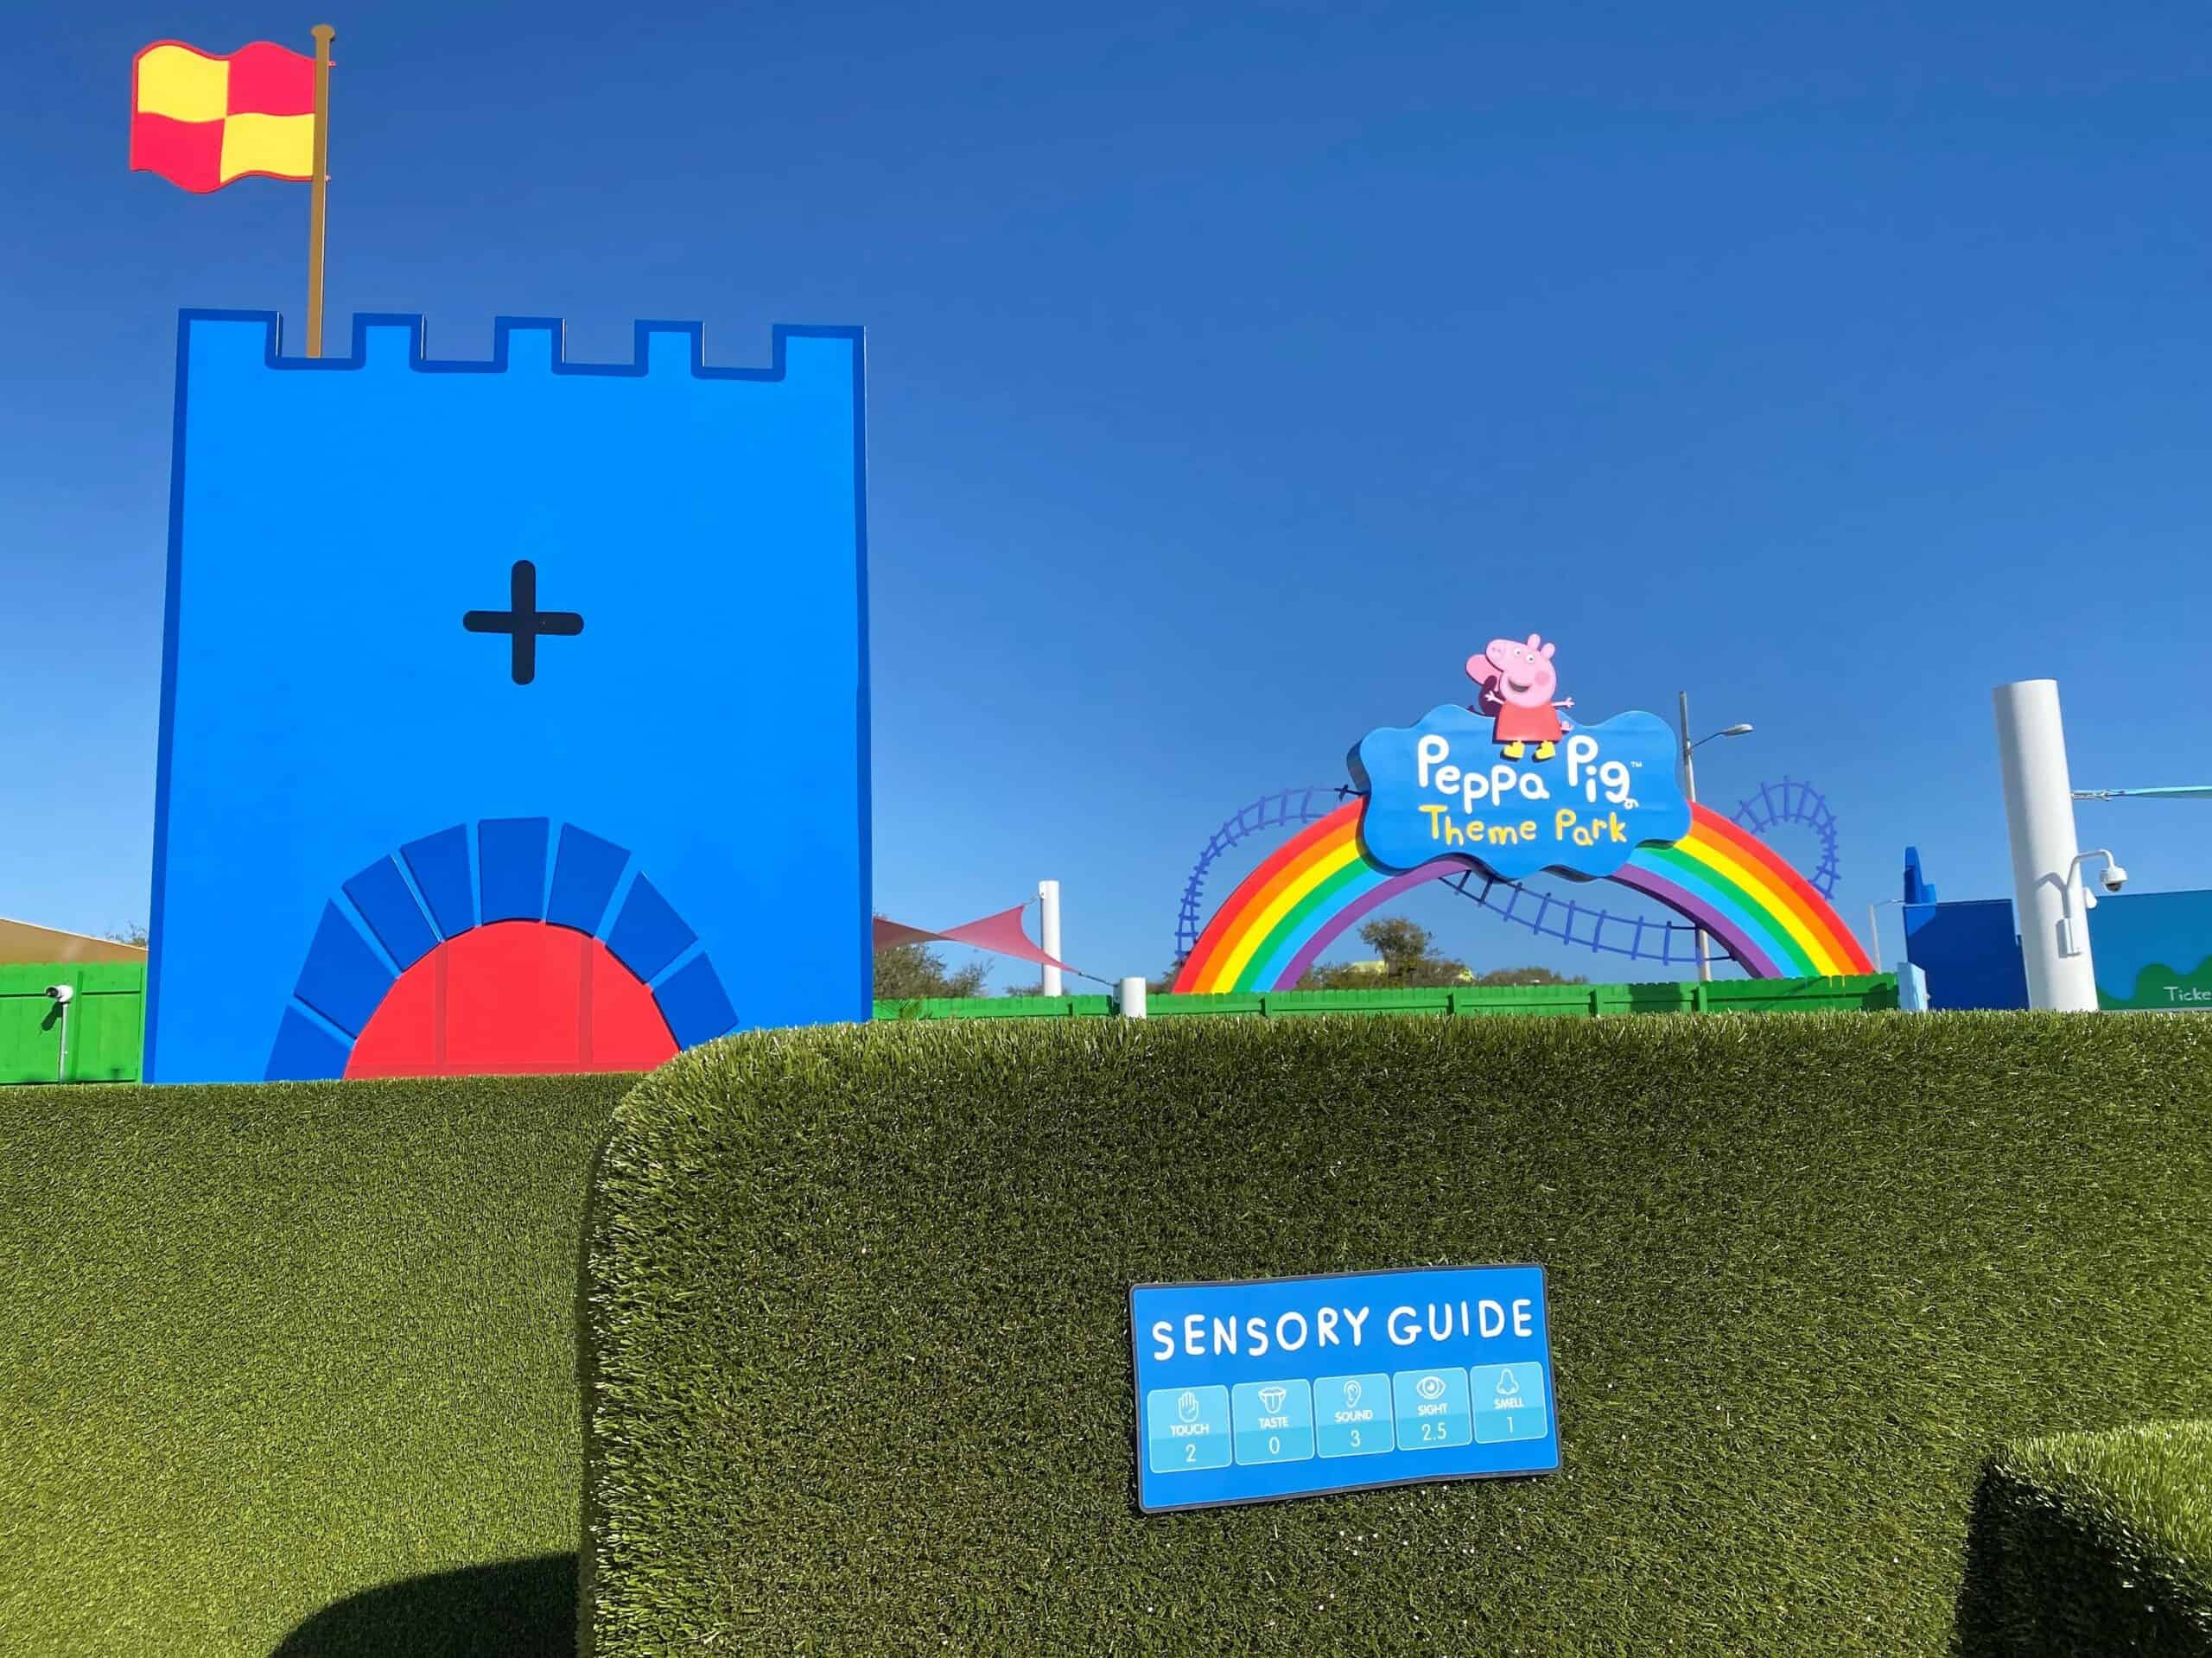 Sensory Guides for Autism friendly experiences at Peppa Pig Theme Park Florida is attached to a green hedge at the entrance of a simple maze